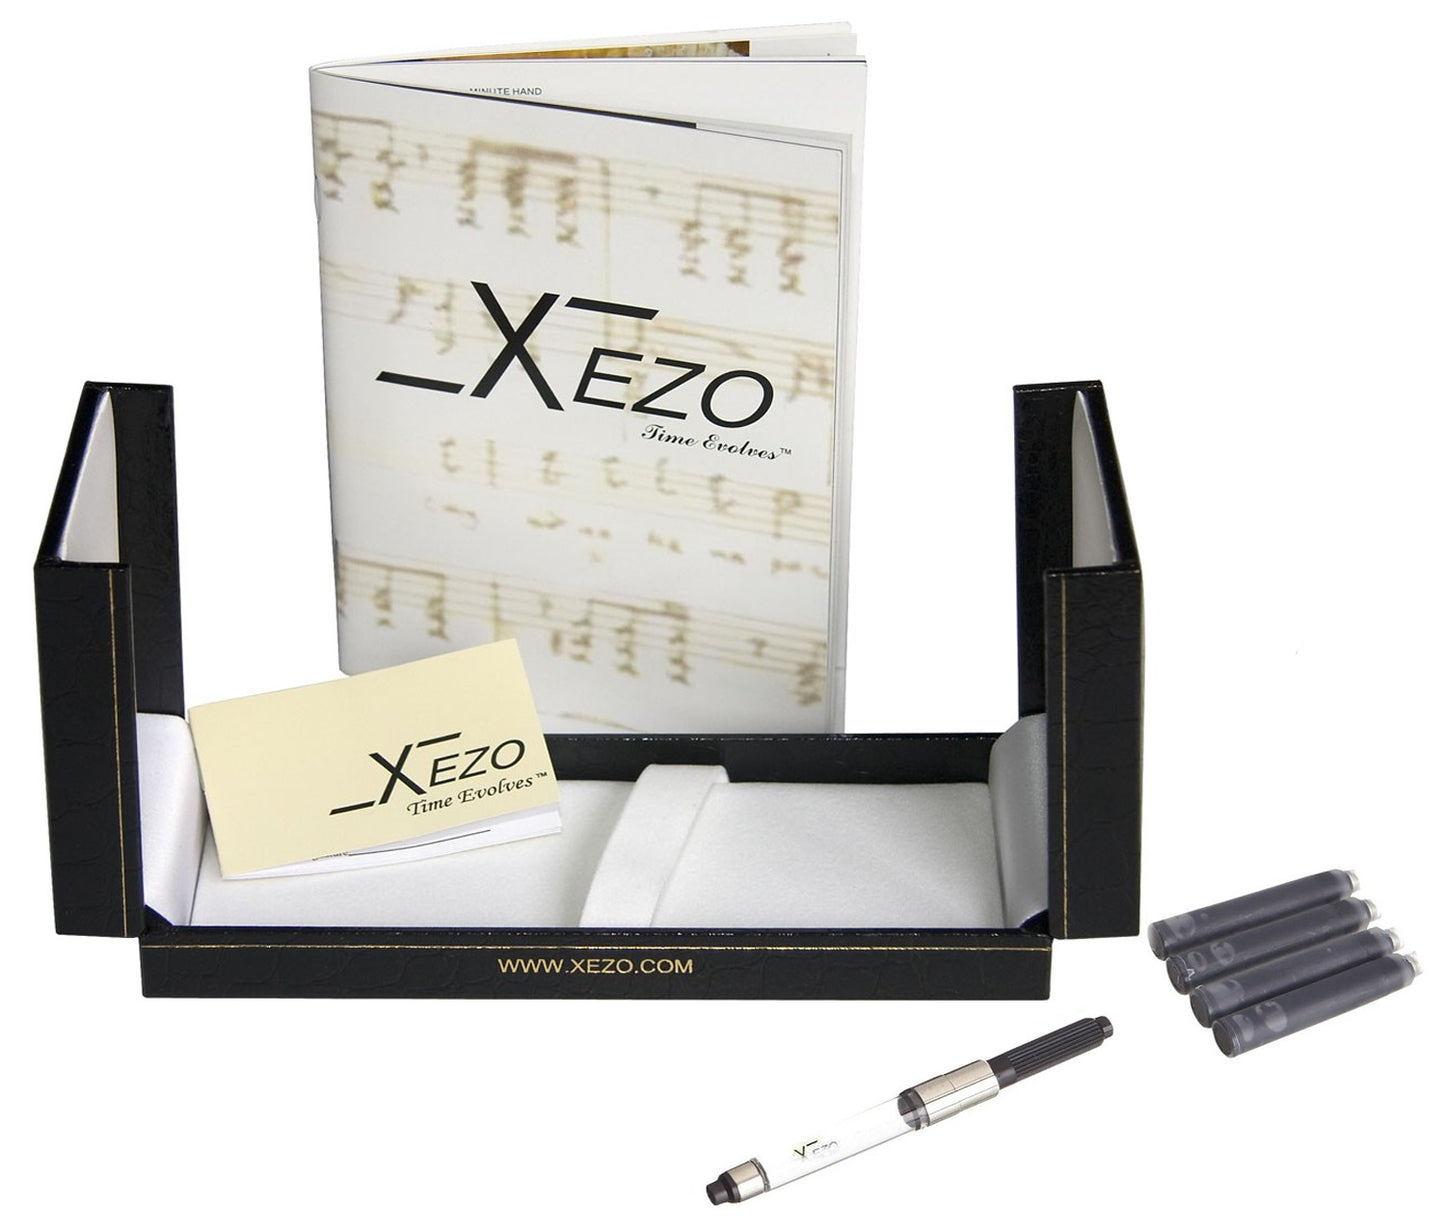 Xezo - Black gift box, certificate, manual, chrome-plated ink converter, and four ink cartridges of the Maestro White MOP F fountain pen